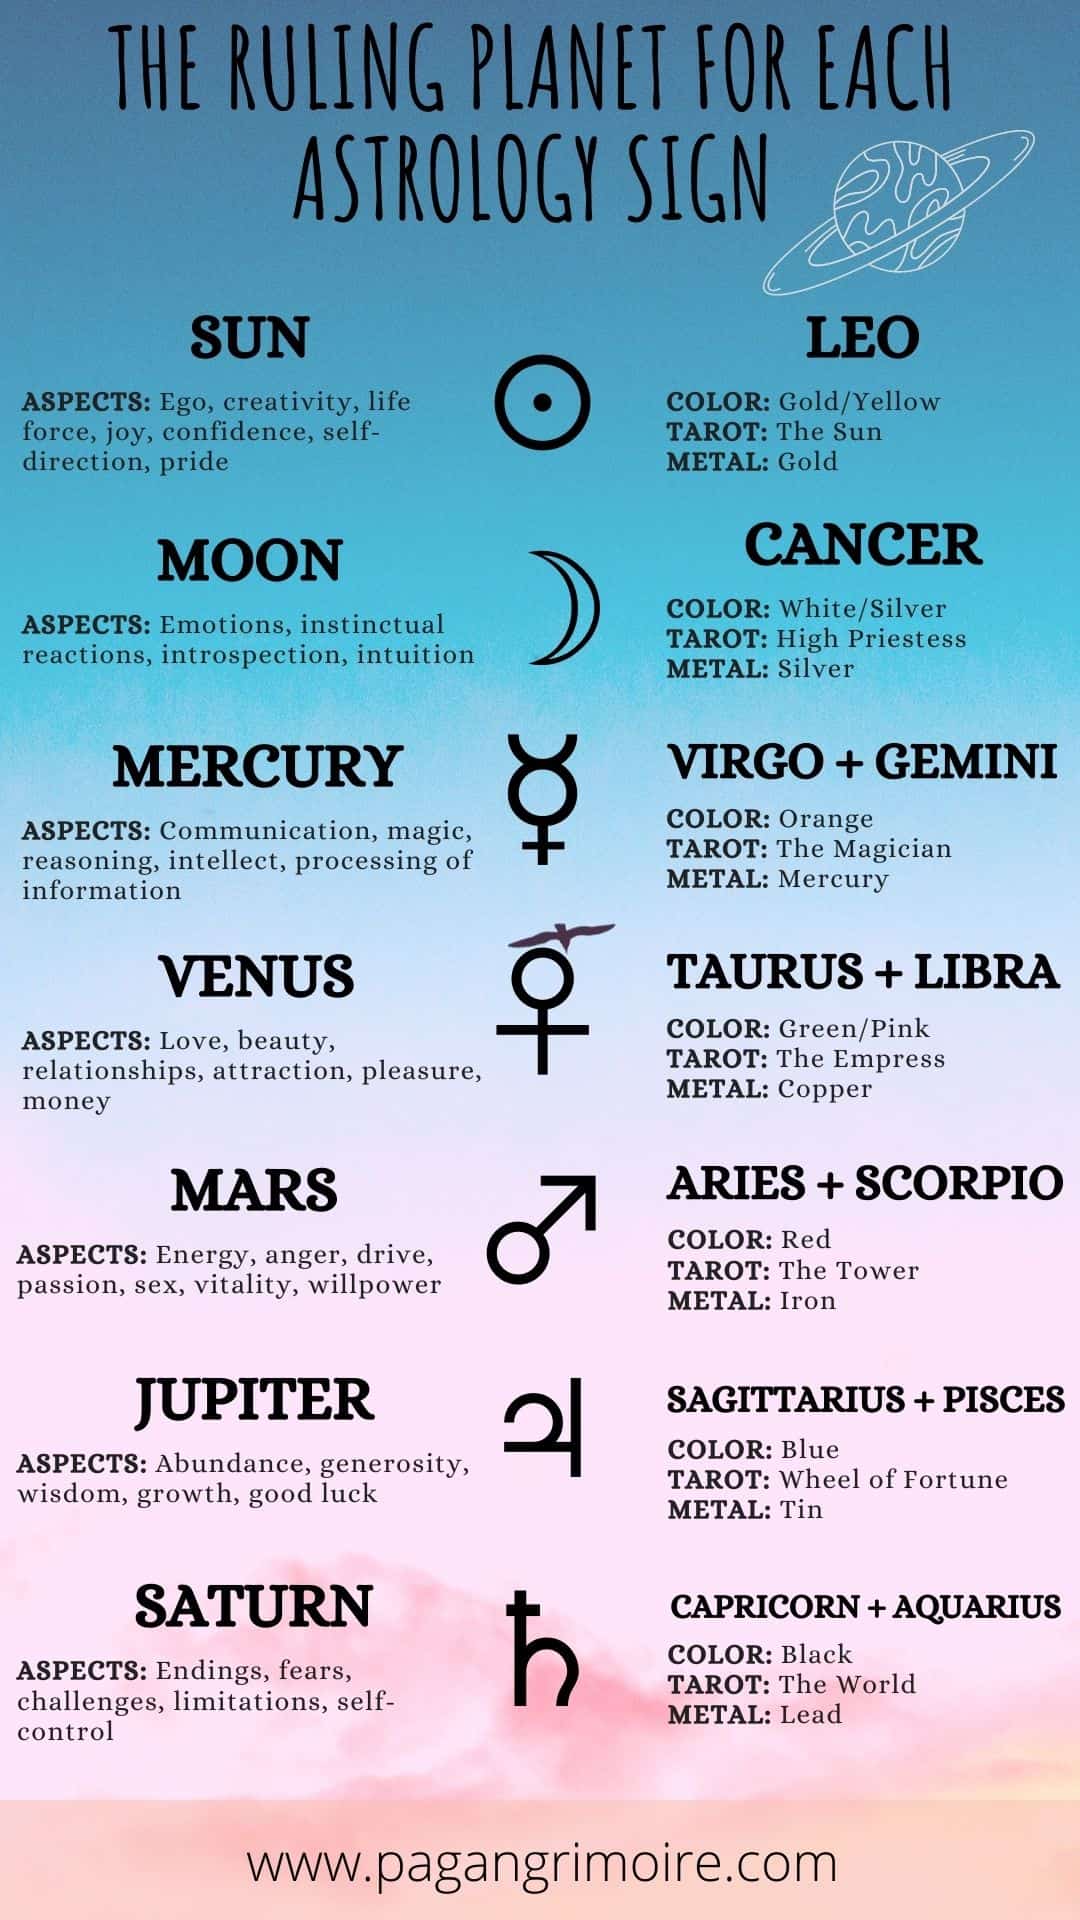 what is jupiter sign in astrology